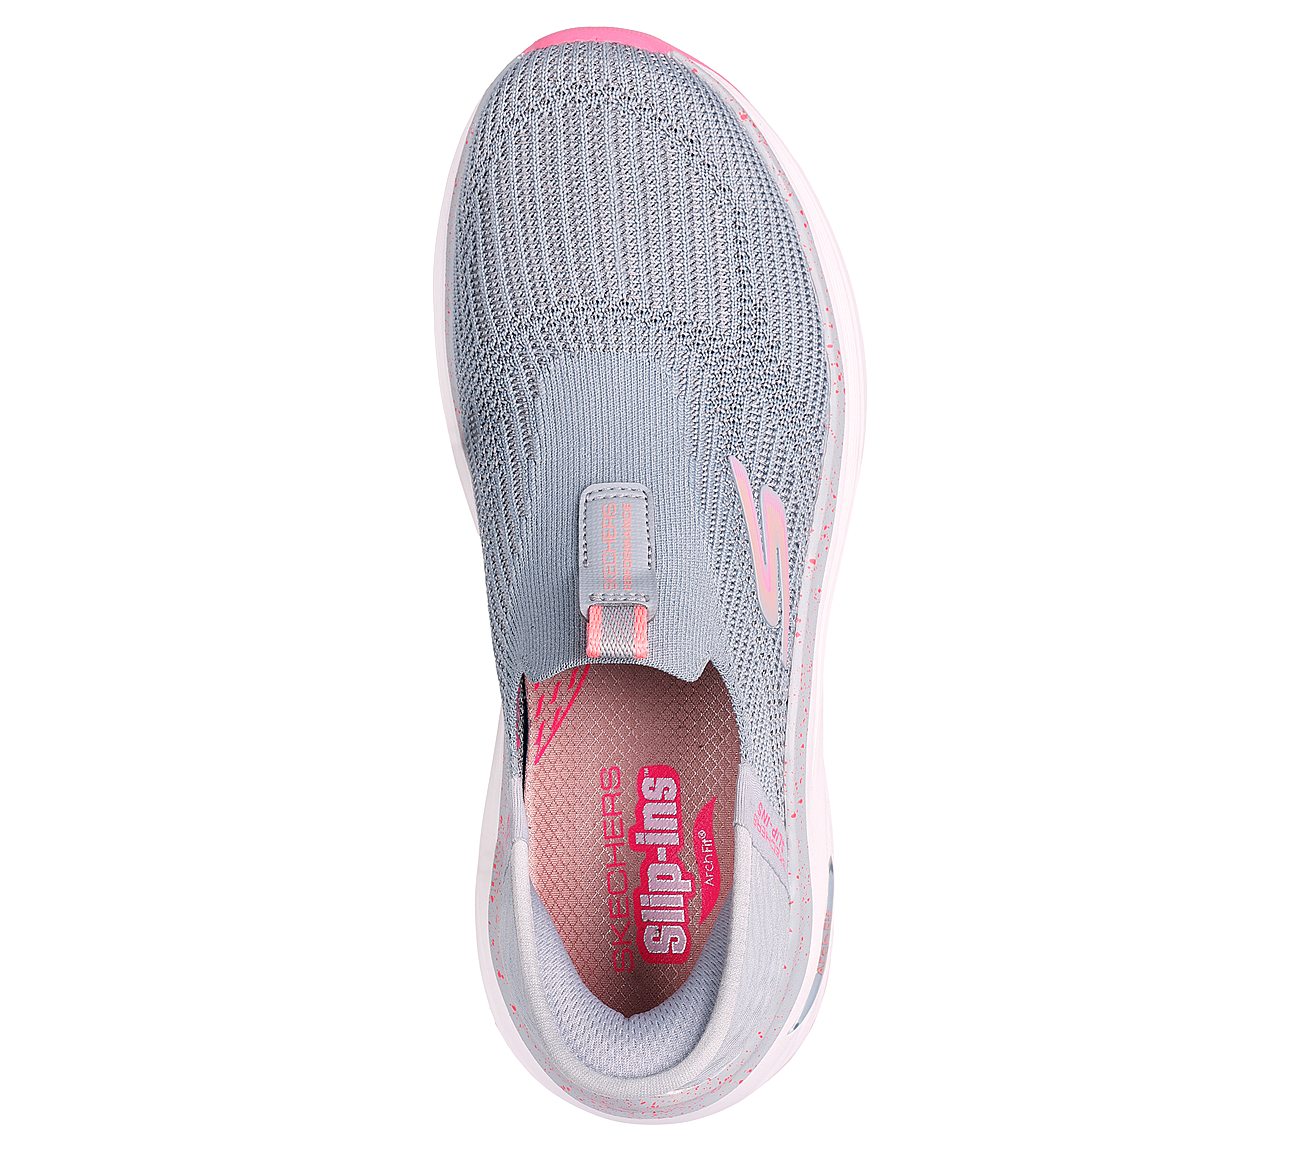 Skechers Slip-ins Max Cushioning Arch Fit - Fluidity, GREY/PINK Footwear Top View